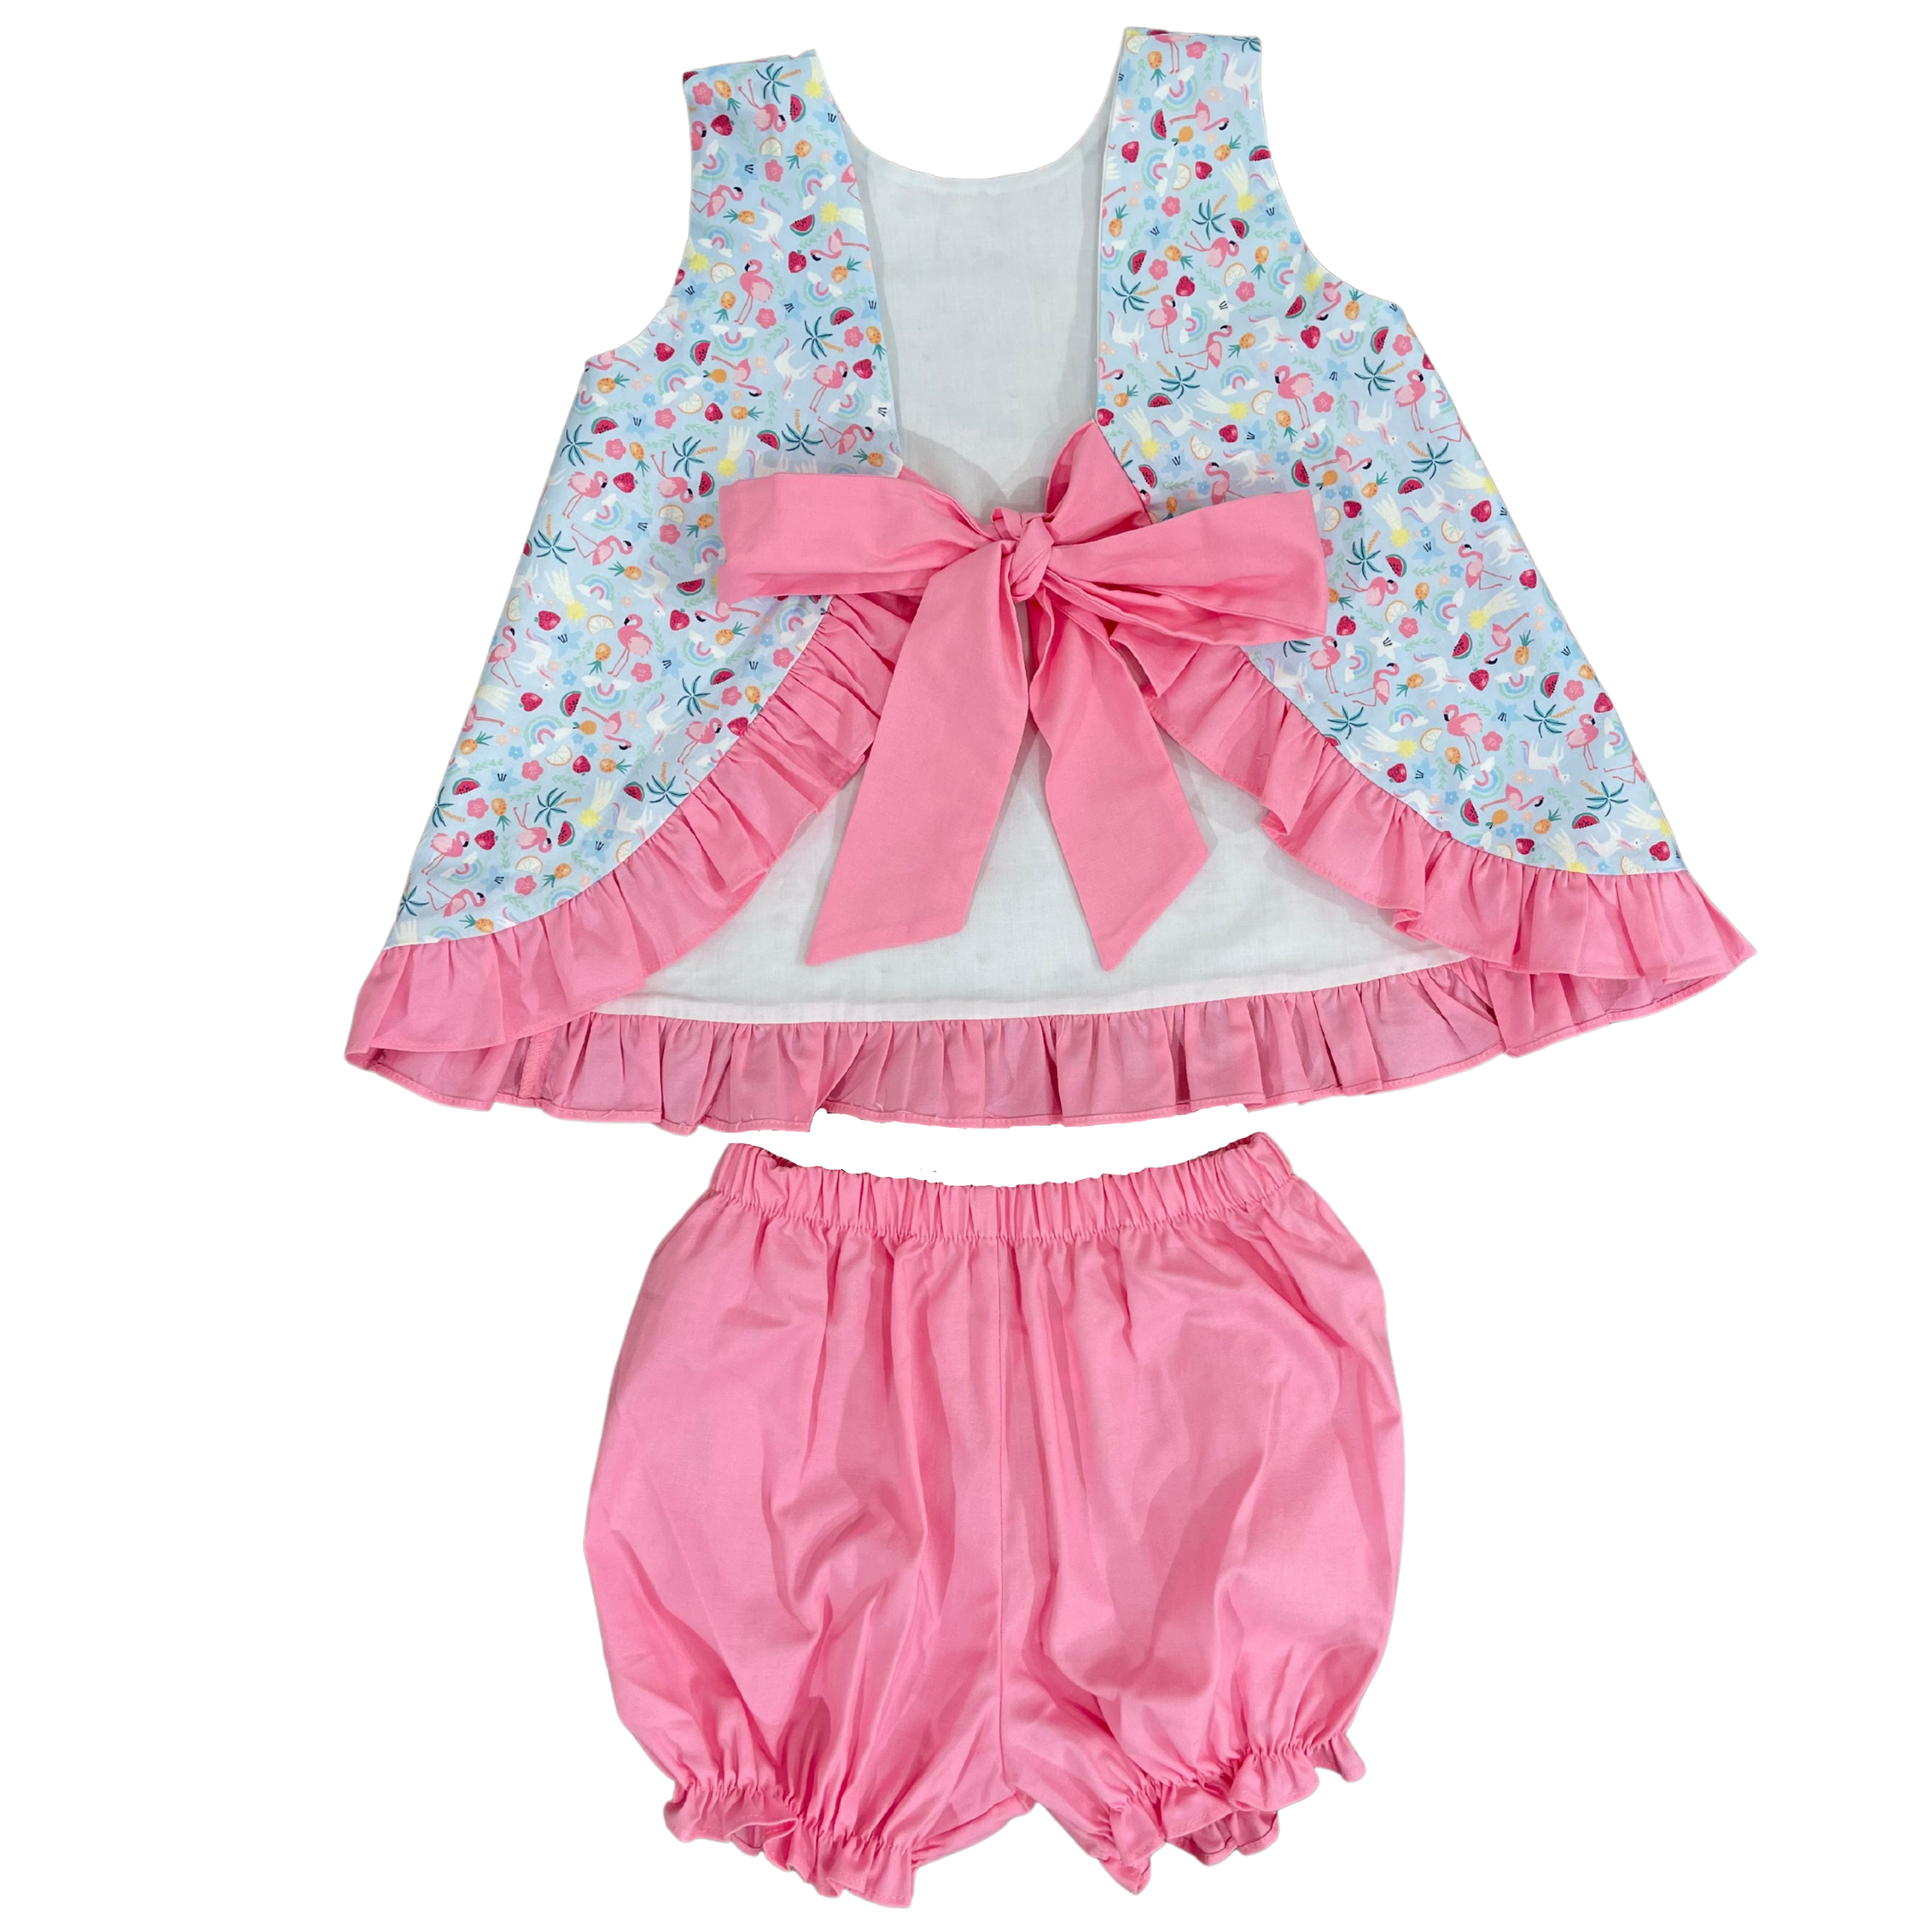 Mae Swing Bloomer/Banded Short Set - Tooty Fruity (Size 6)